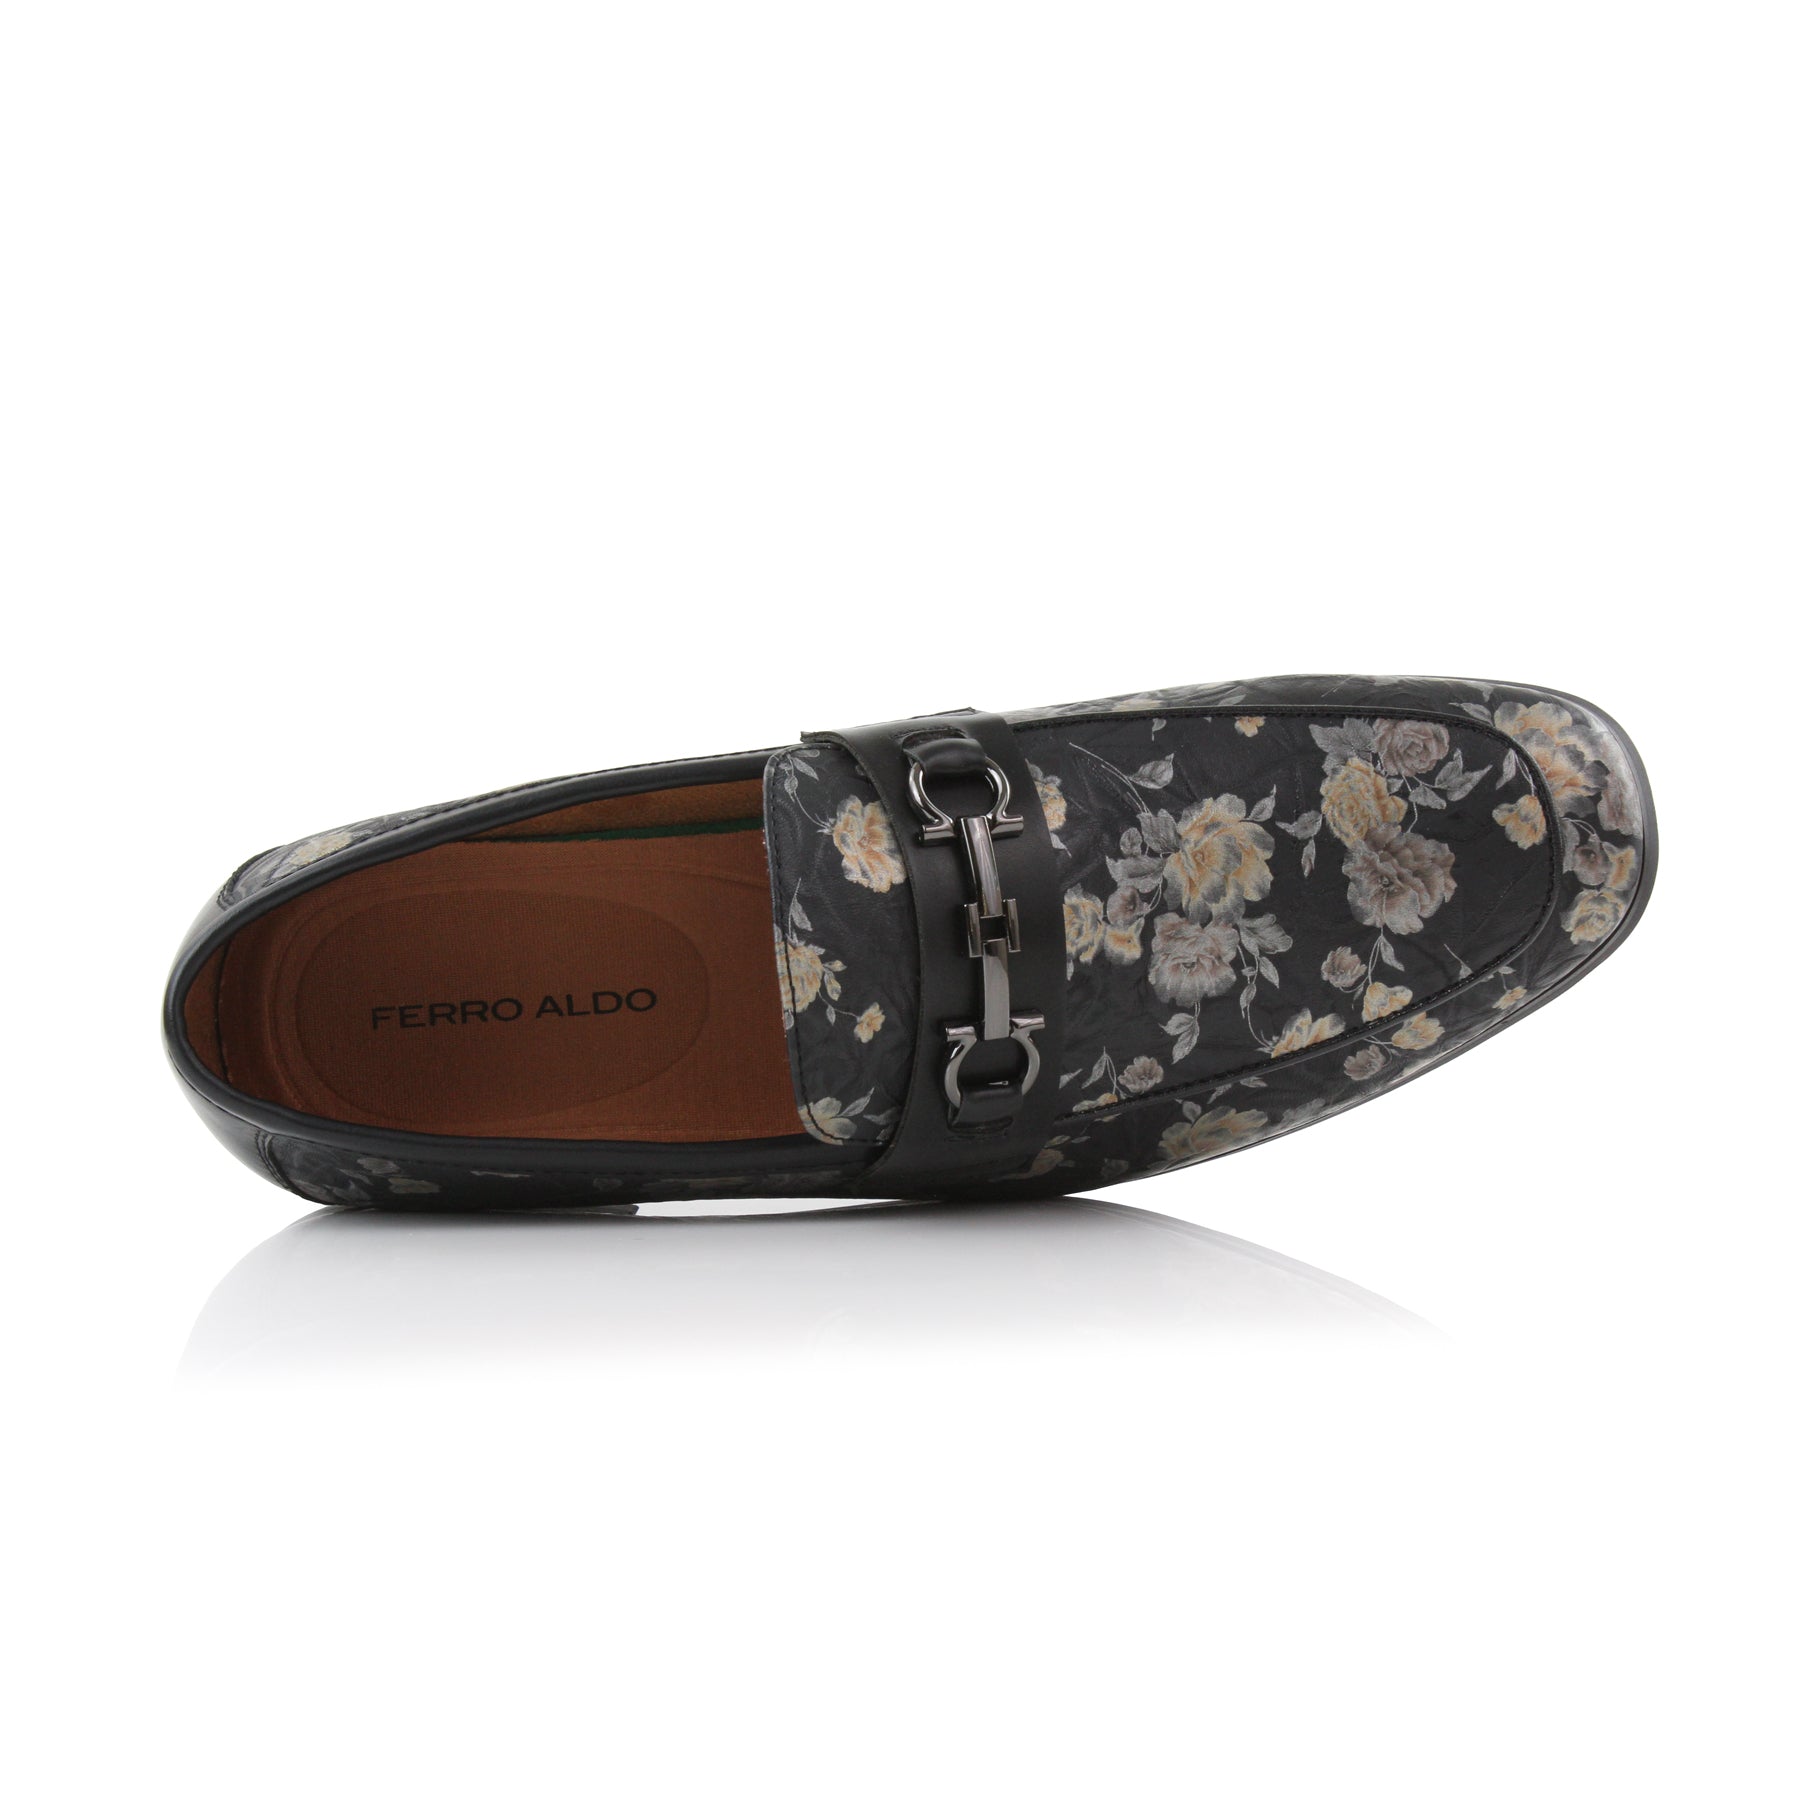 Floral Vegan Loafers | Darrell by Ferro Aldo | Conal Footwear | Top-Down Angle View